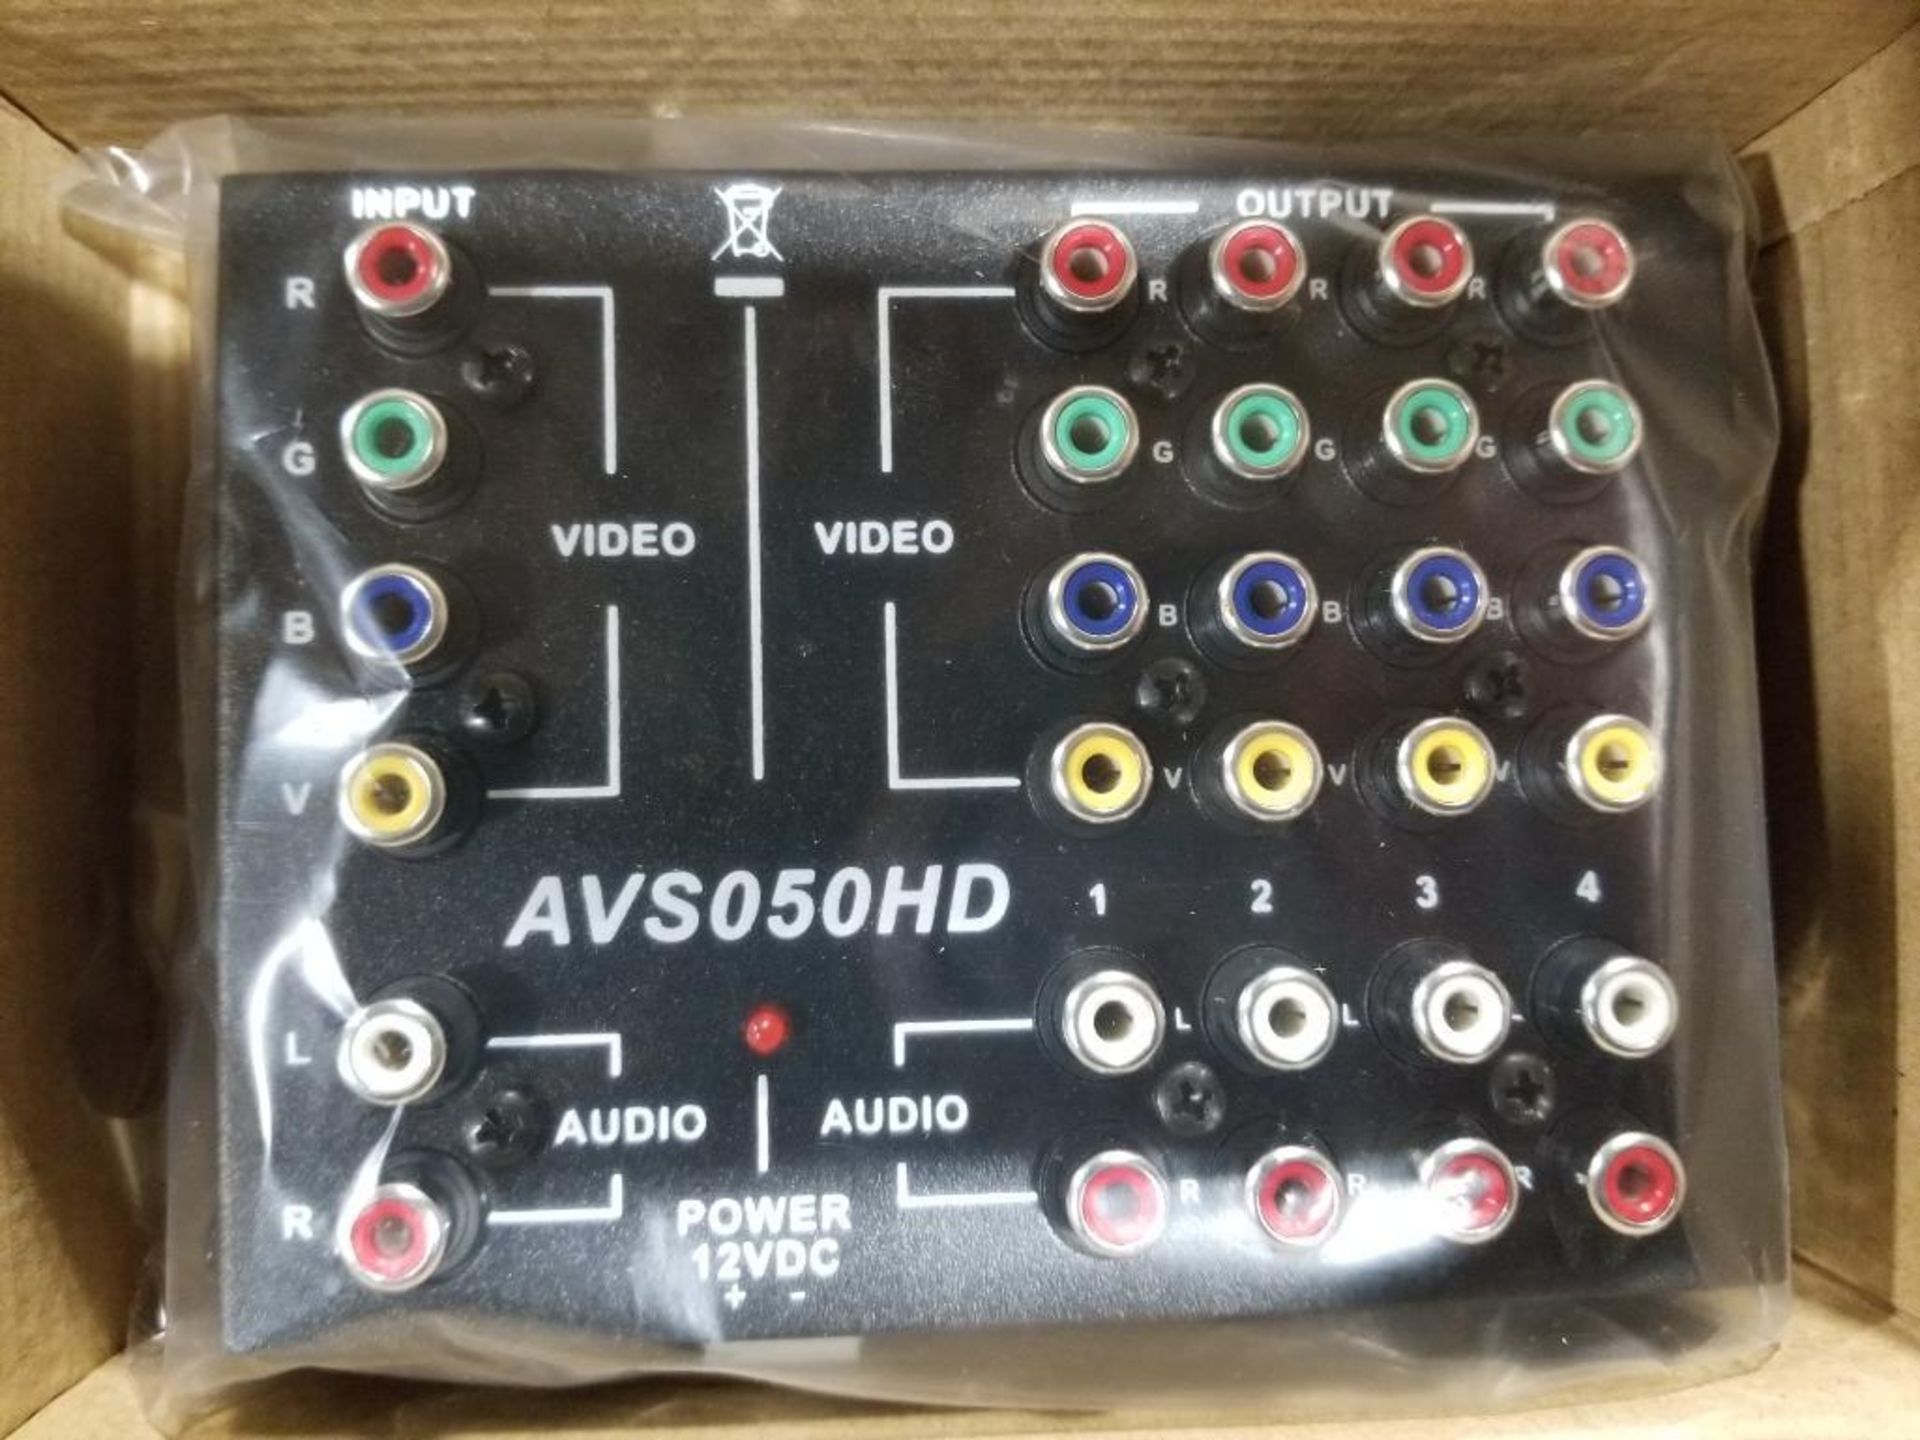 Qty 60 - Riverpark audio video distribution box. Part number AVS050HD. - Image 4 of 5